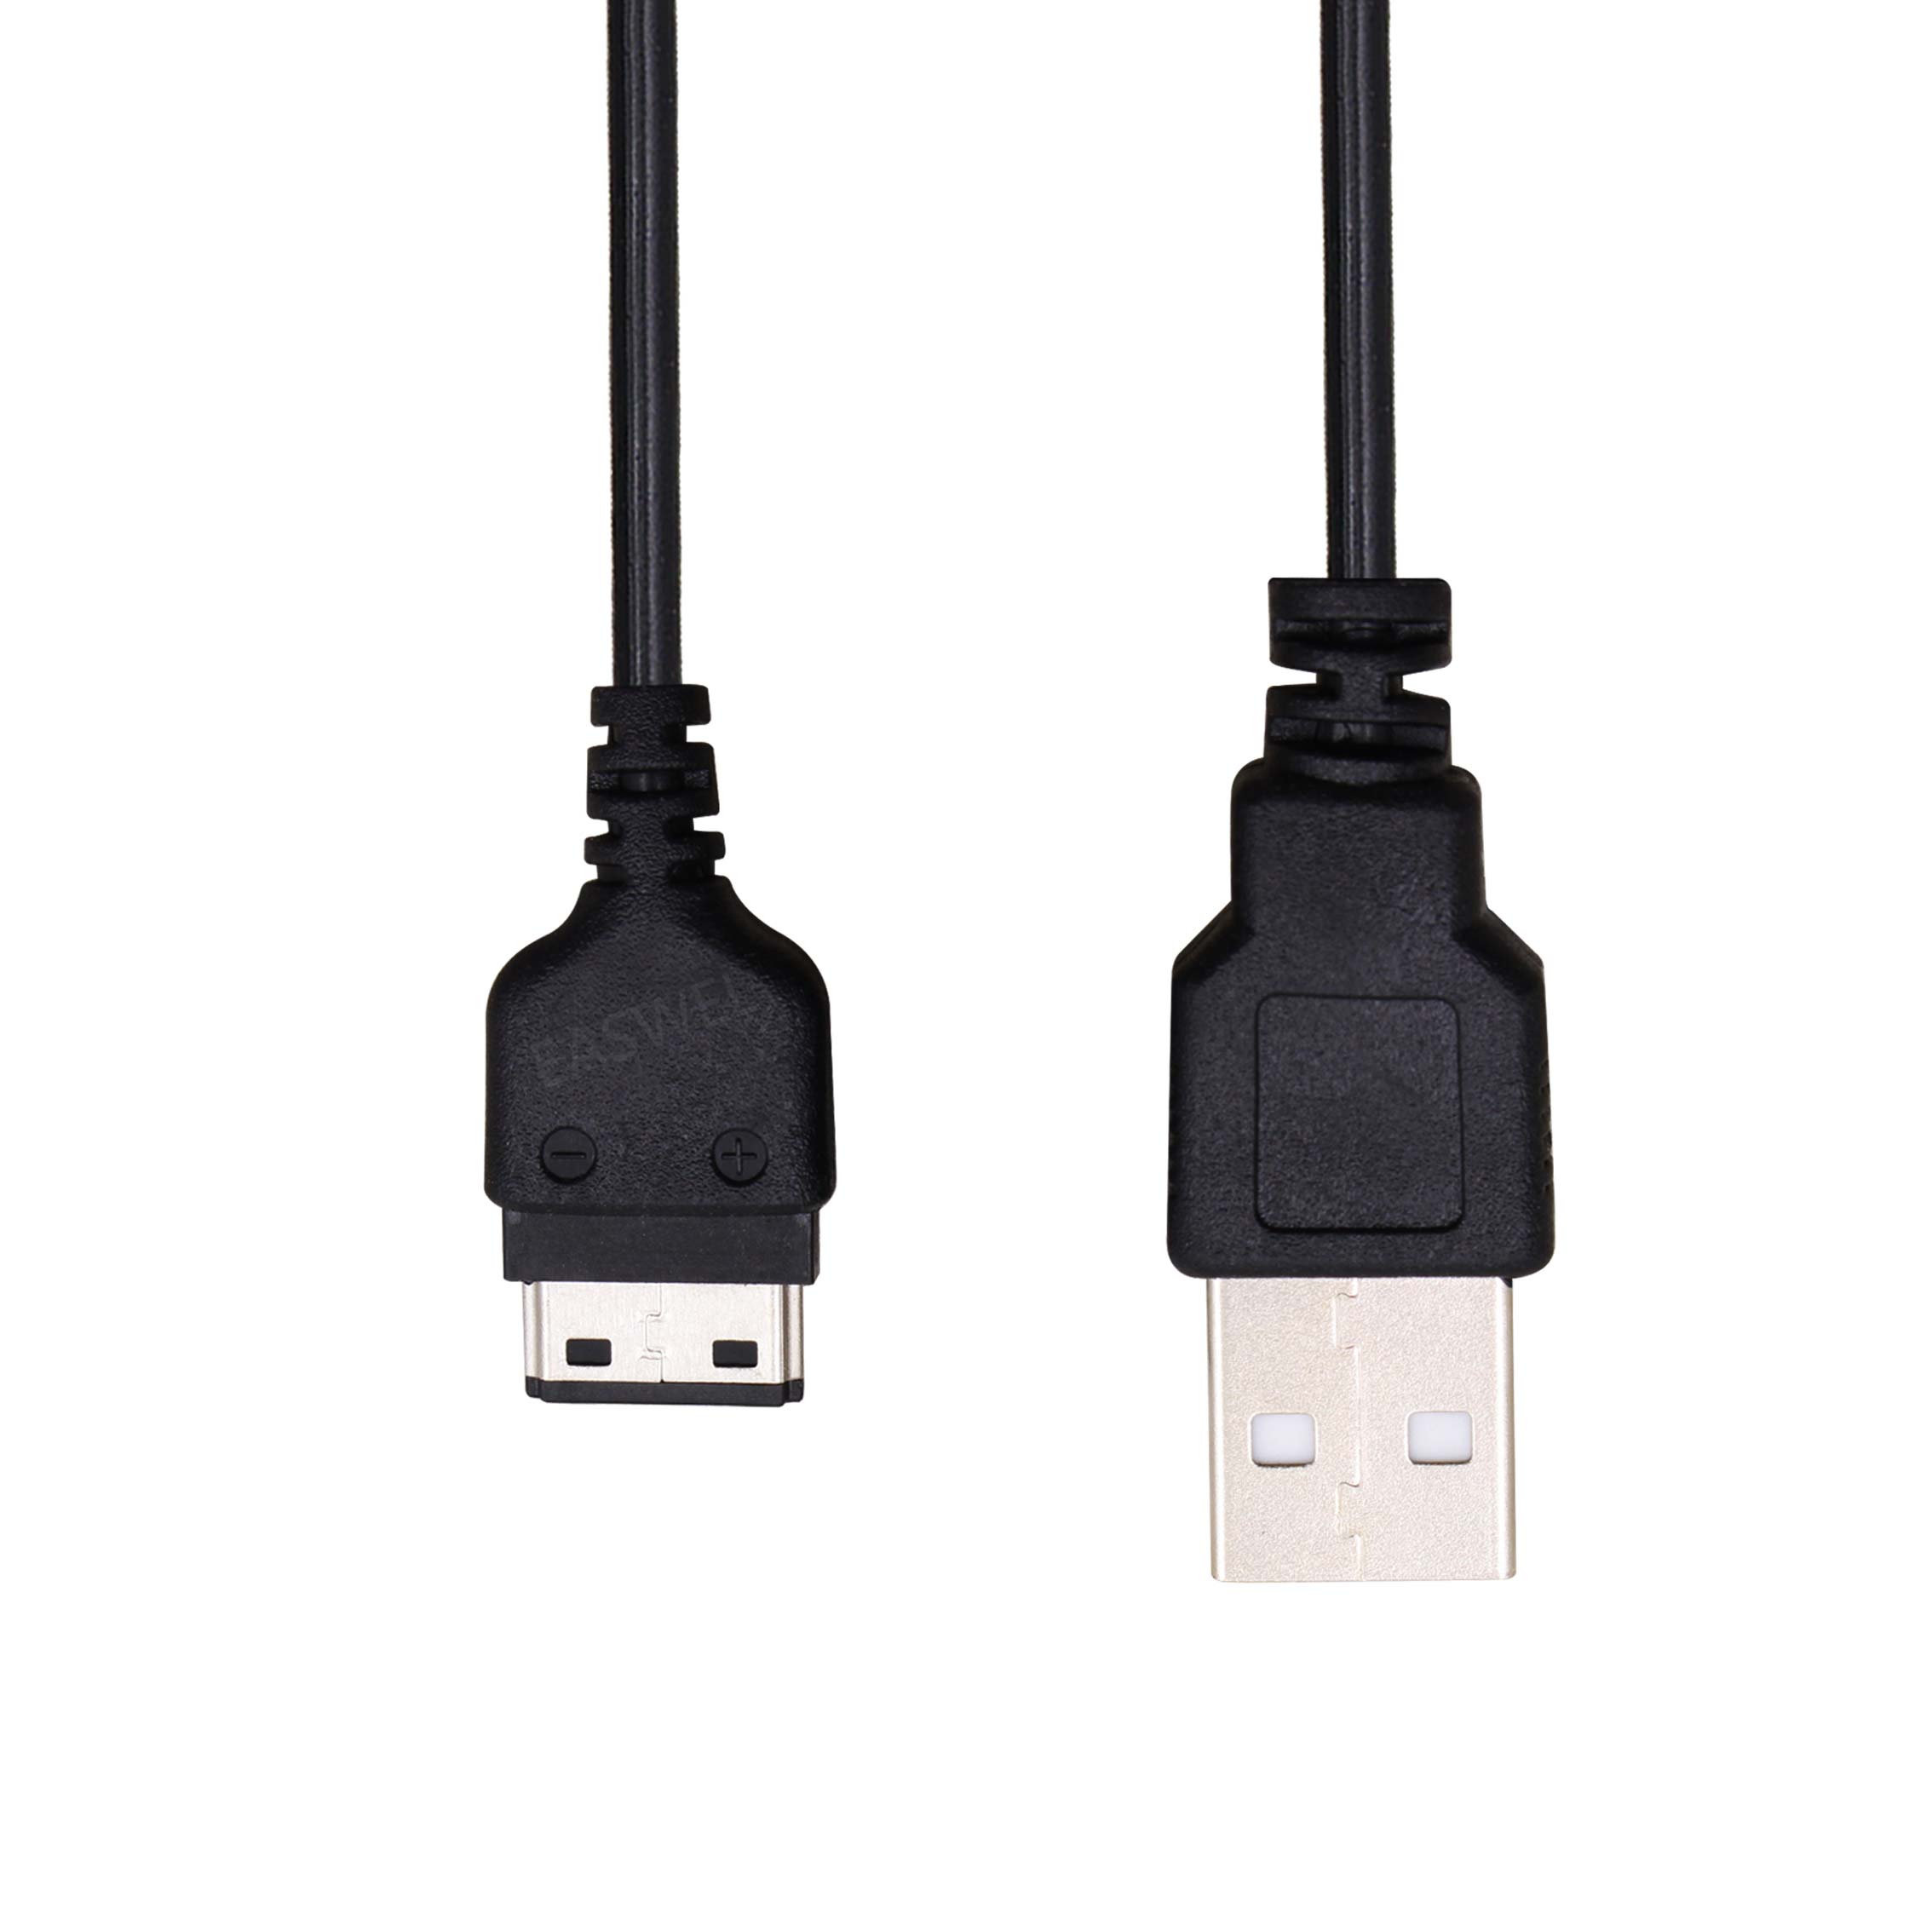 USB Charger Data Cable Koord voor Samsung sgh-f406 sgh-f480 sgh-f490 sgh-f700